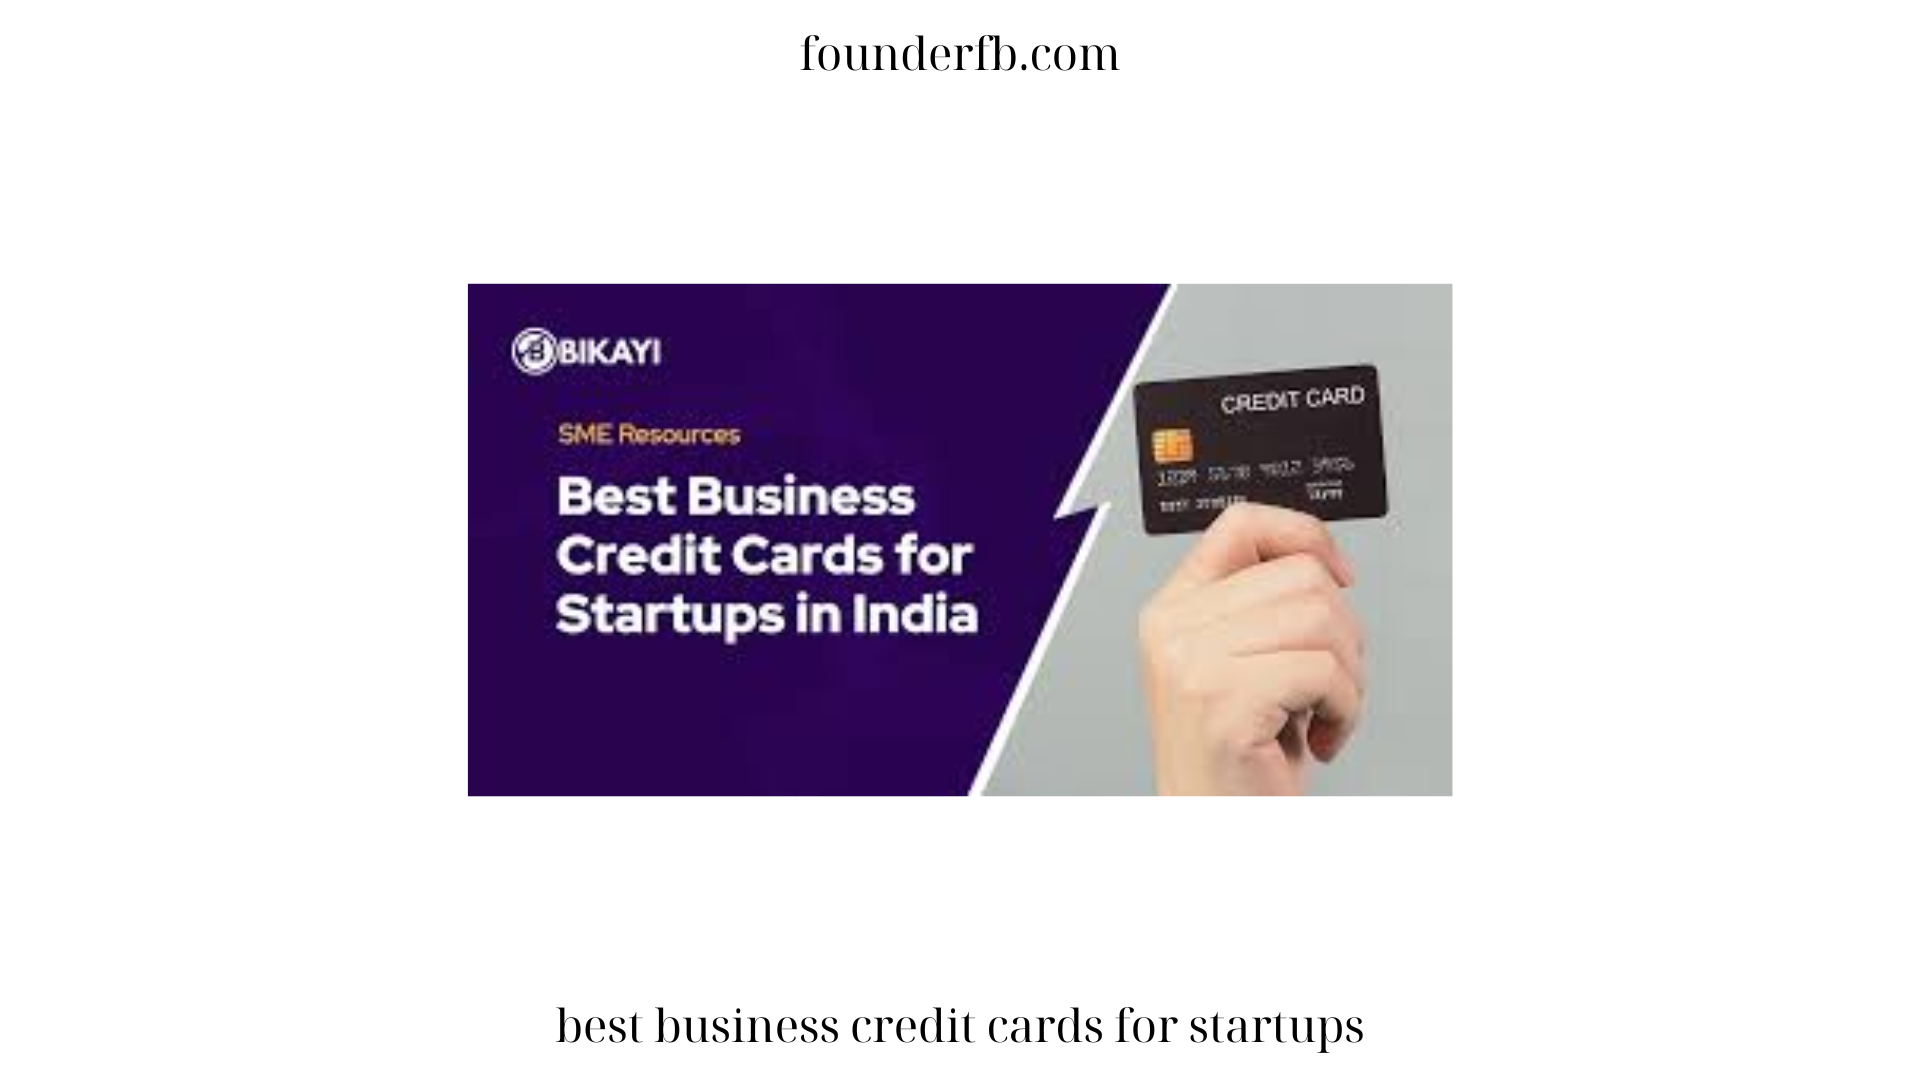 Startup Success: The Best Business Credit Cards for Startups